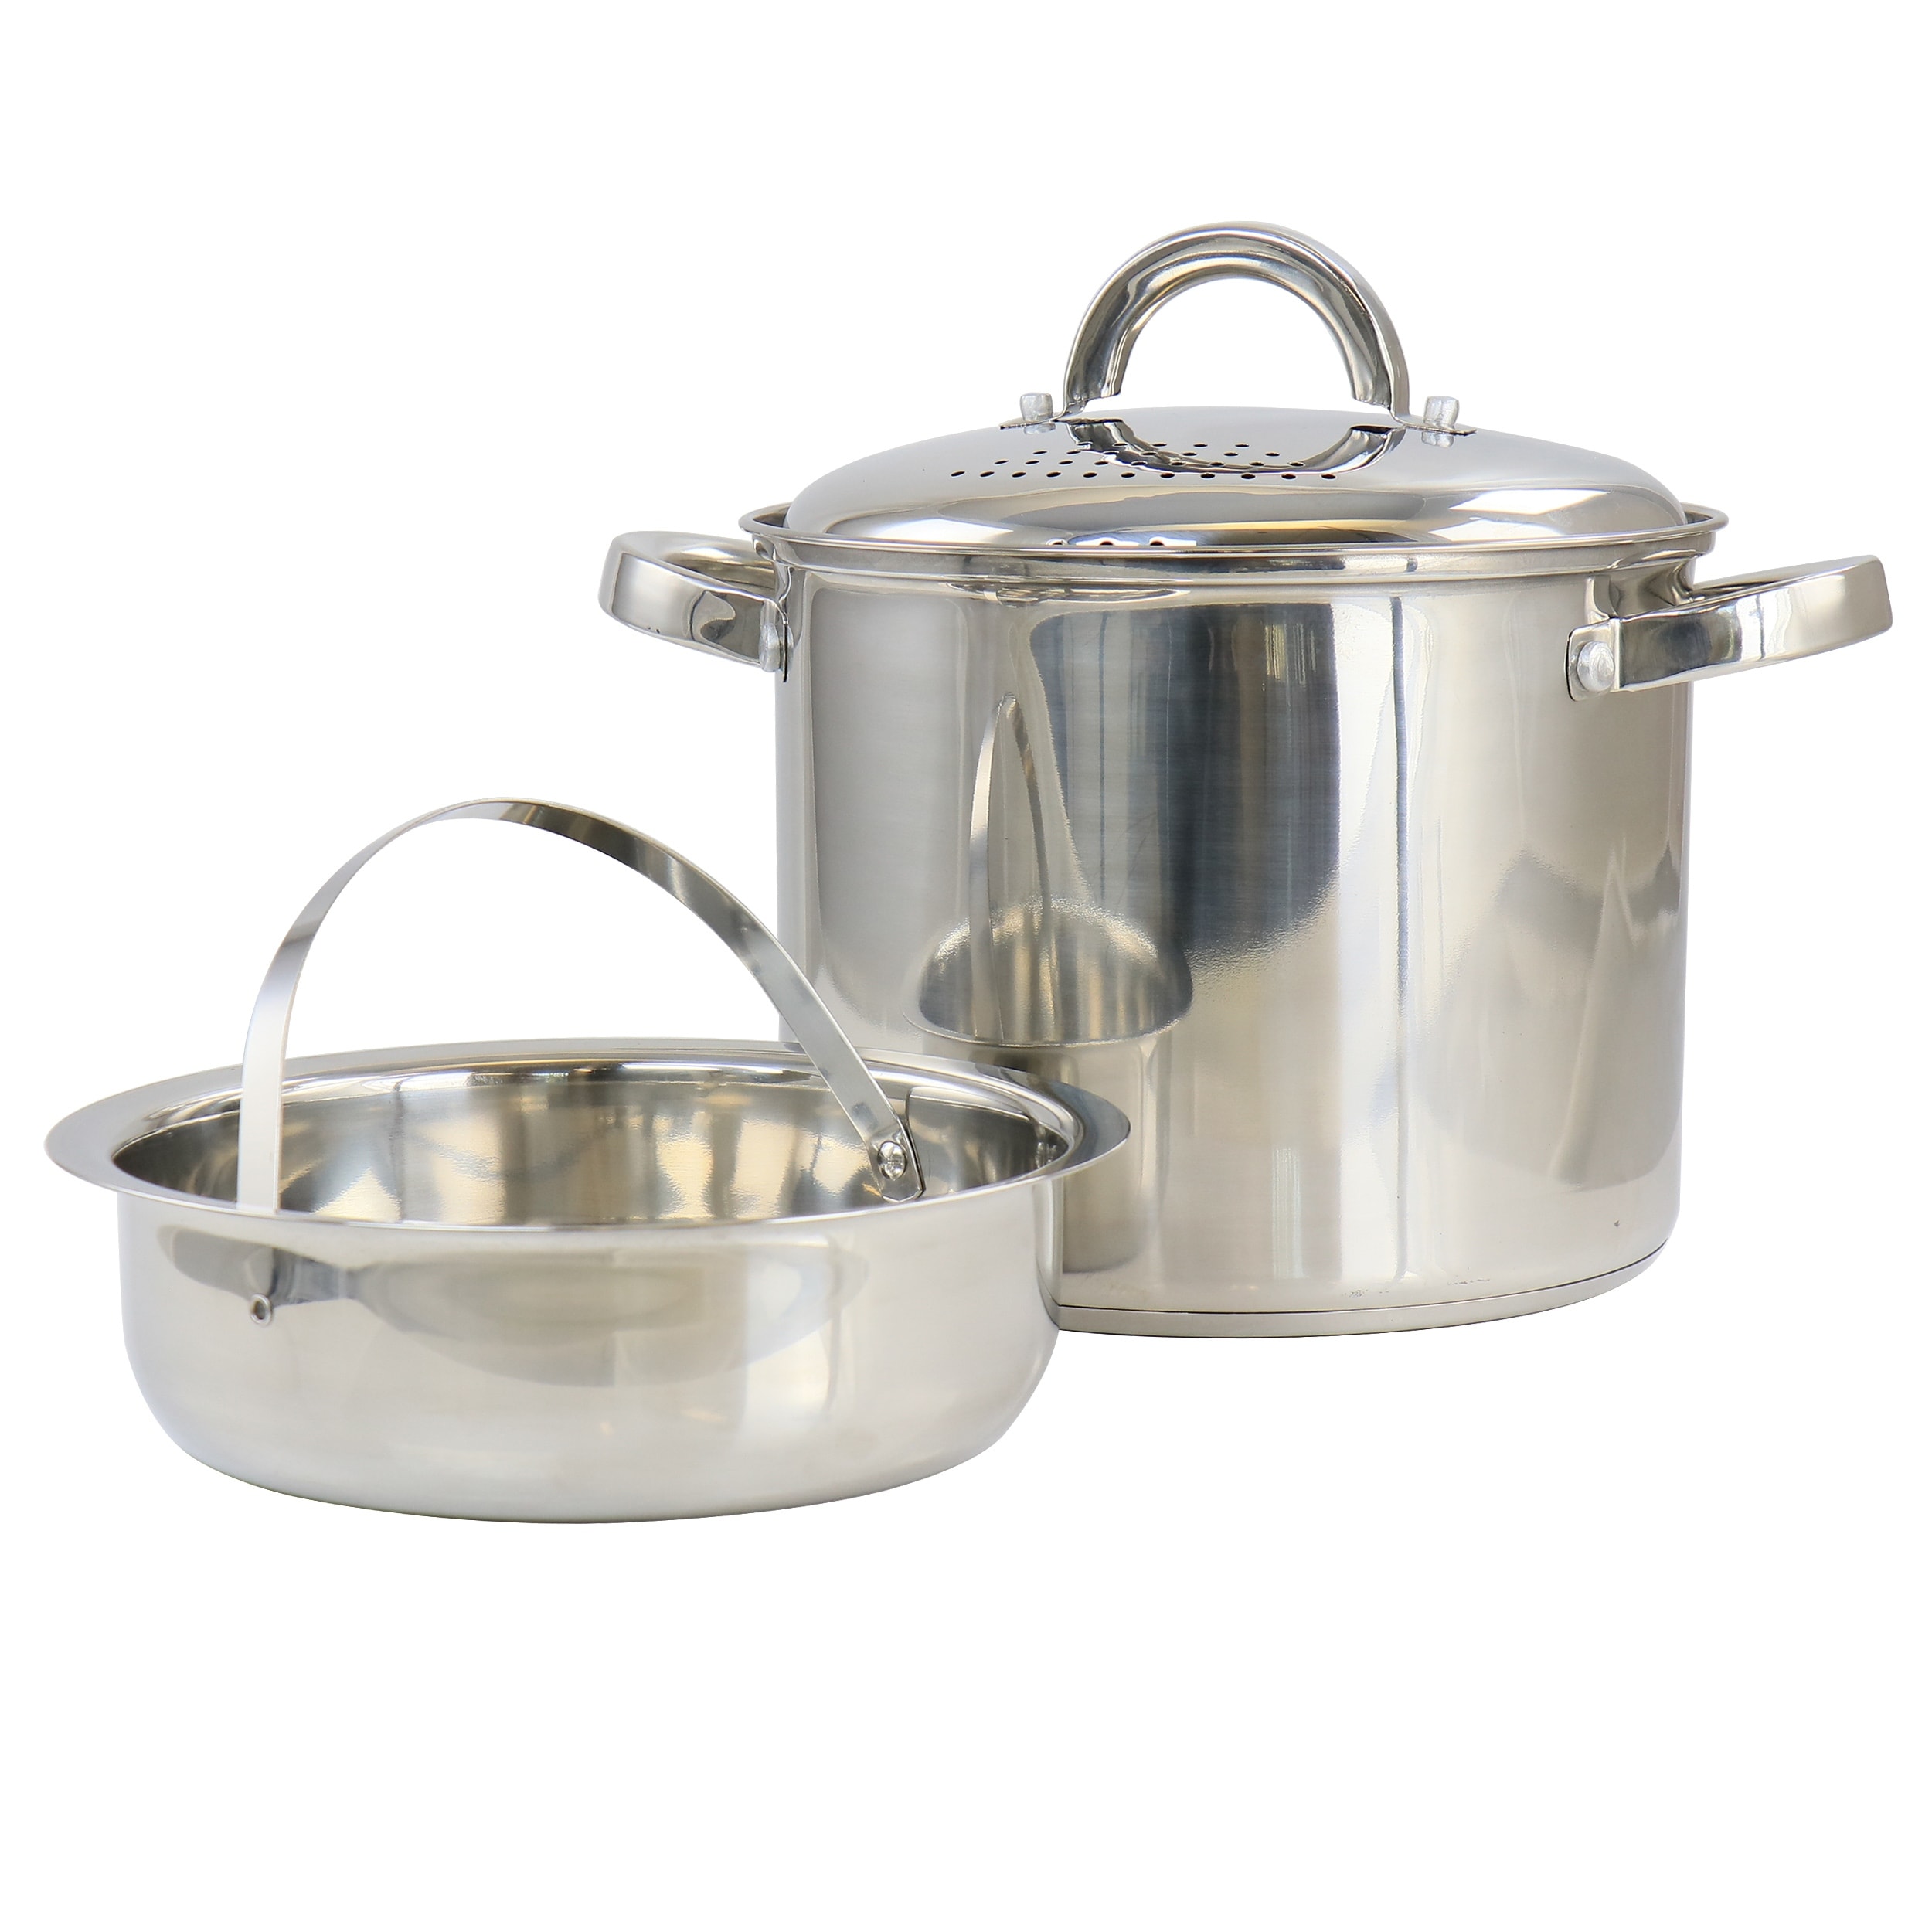 https://ak1.ostkcdn.com/images/products/is/images/direct/1fb34e9c310a2f3bc04380186aeb66bf68e1cfdd/Oster-Sangerfield-5-Quart-Stainless-Steel-Pasta-Pot-with-Strainer-Lid-and-Steamer-Basket.jpg